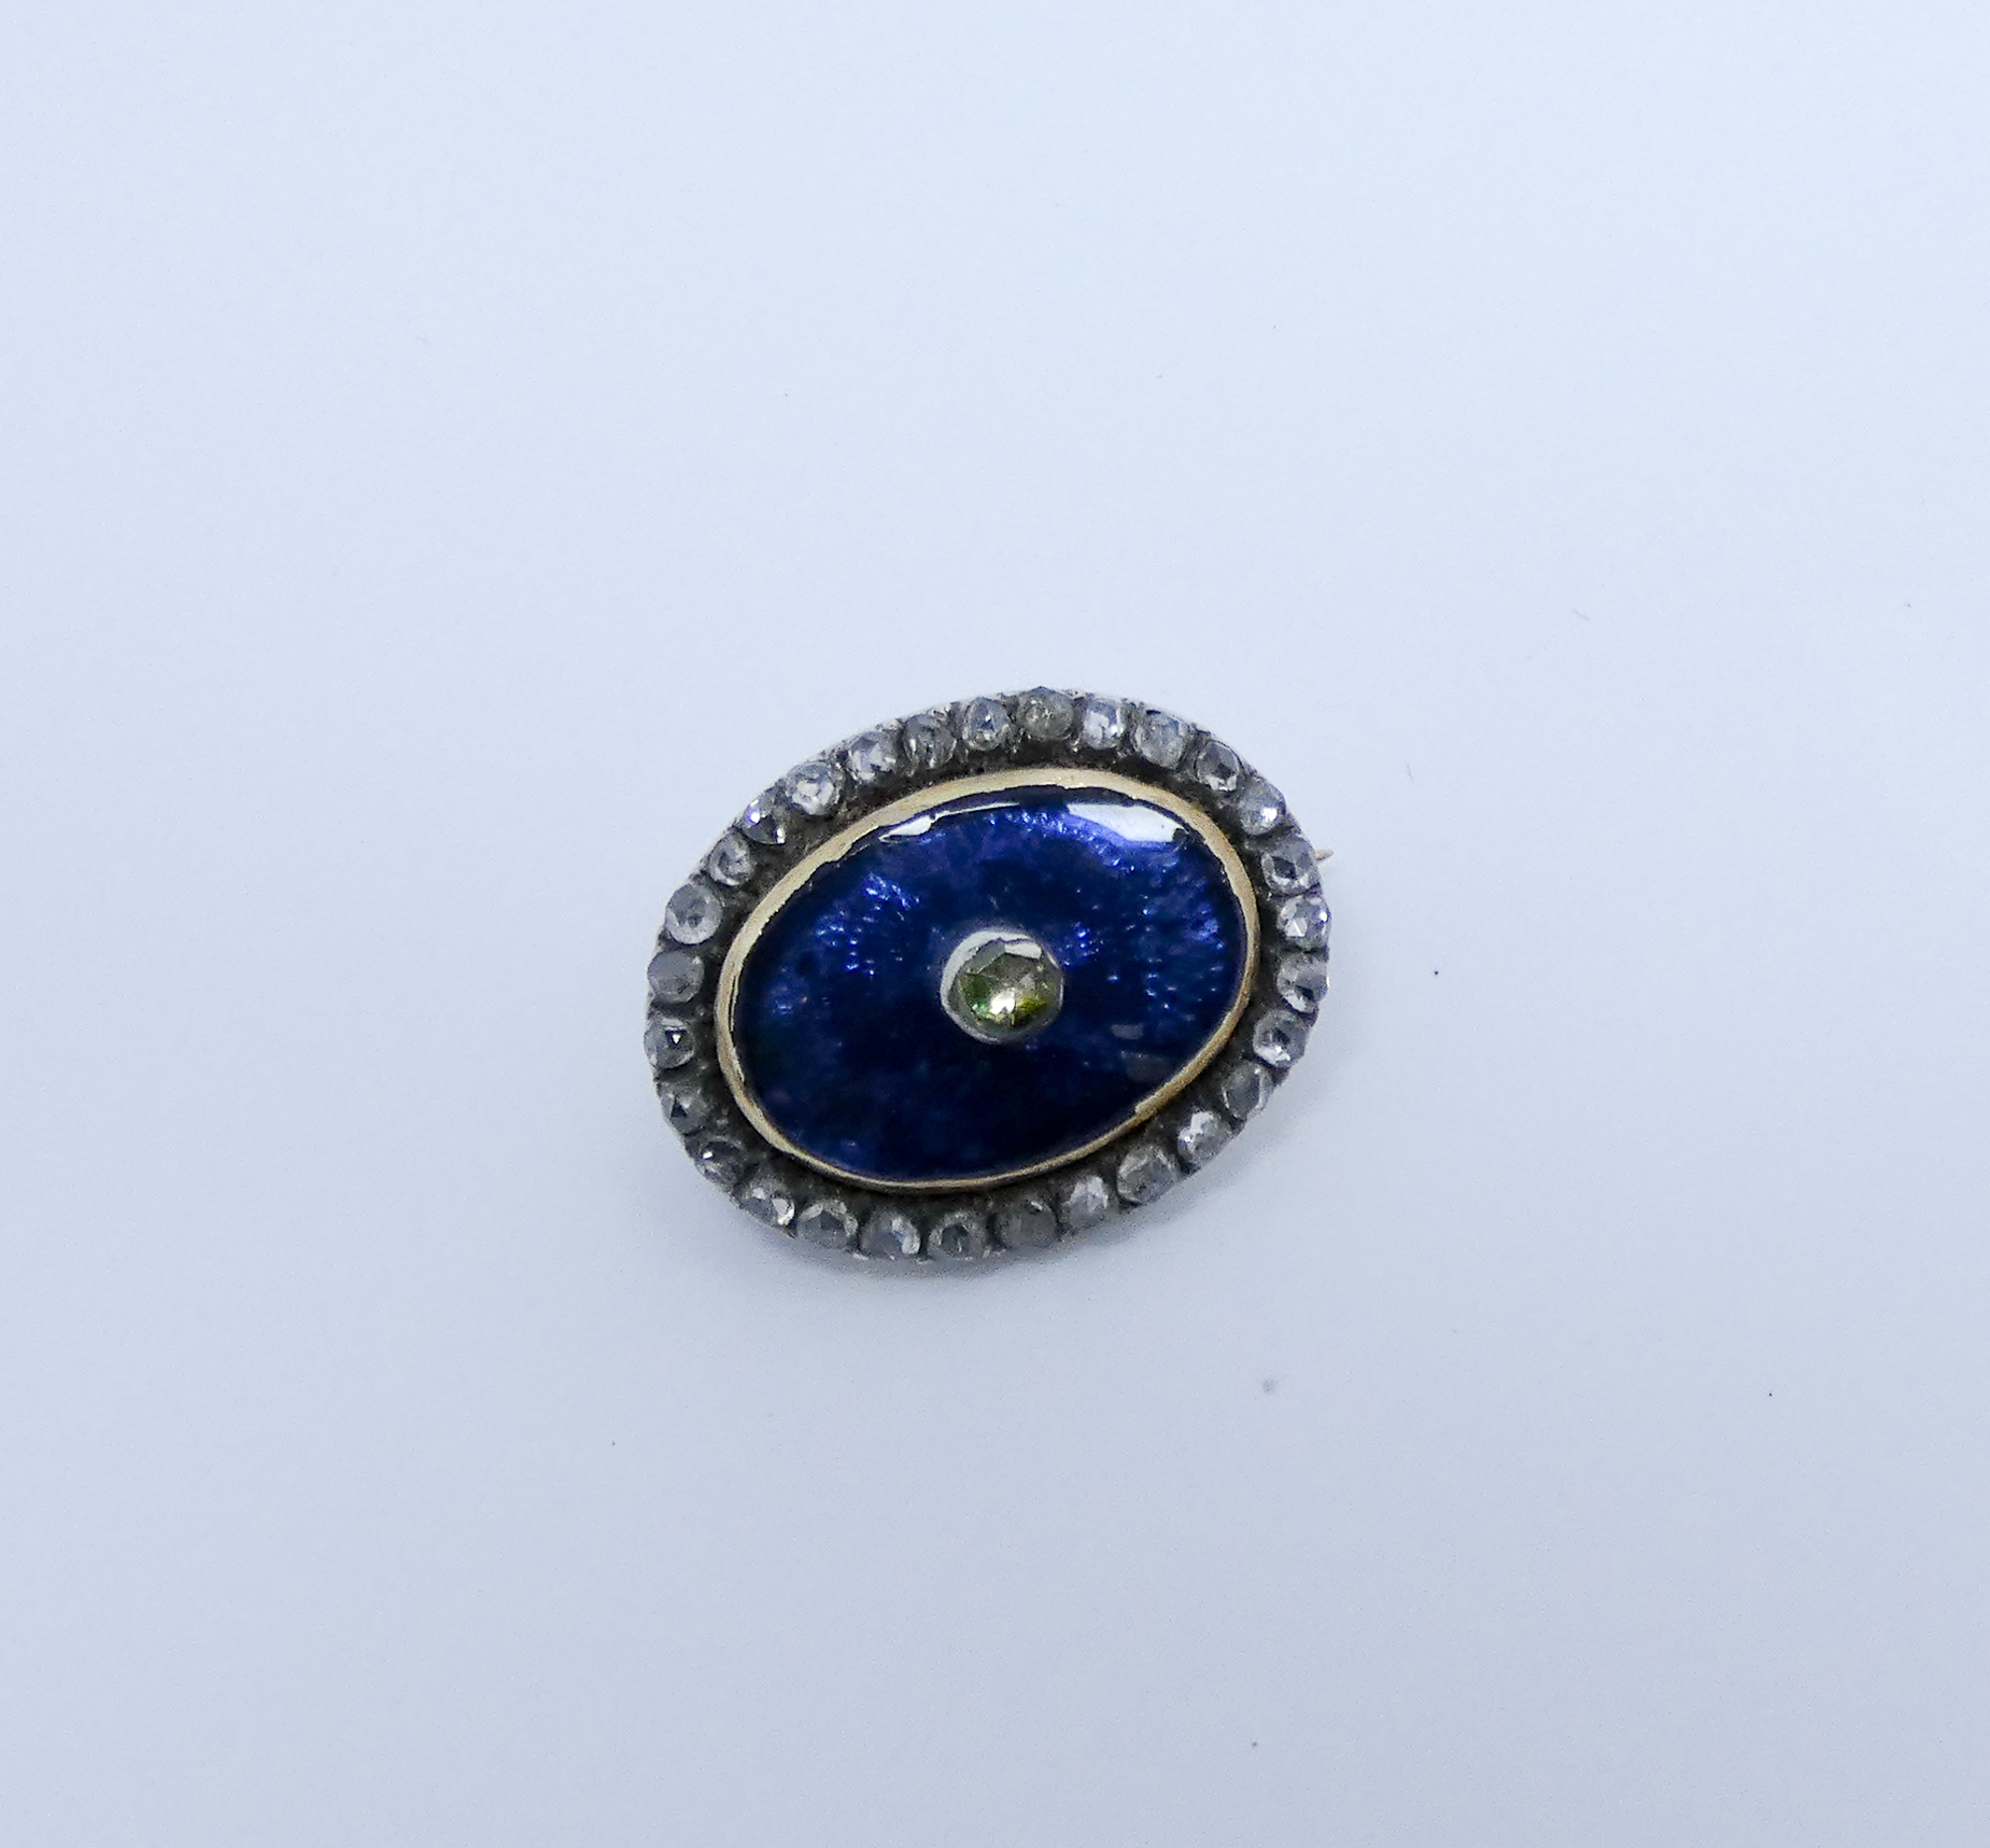 19th Century oval diamond and enamel brooch, 2cm long set in gold weight 4.